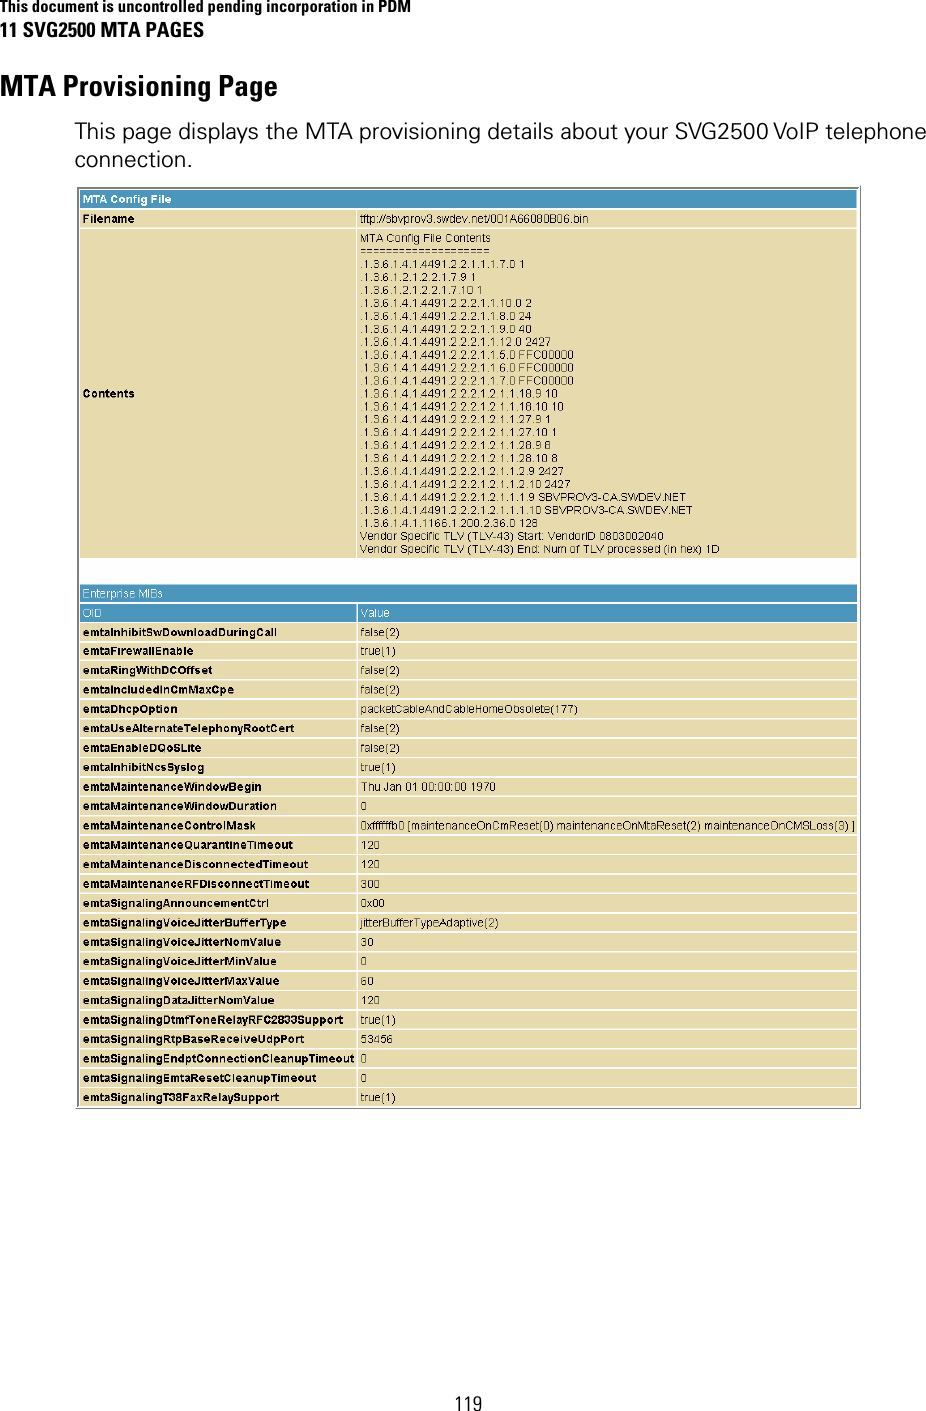 This document is uncontrolled pending incorporation in PDM 11 SVG2500 MTA PAGES  119 MTA Provisioning Page This page displays the MTA provisioning details about your SVG2500 VoIP telephone connection.  